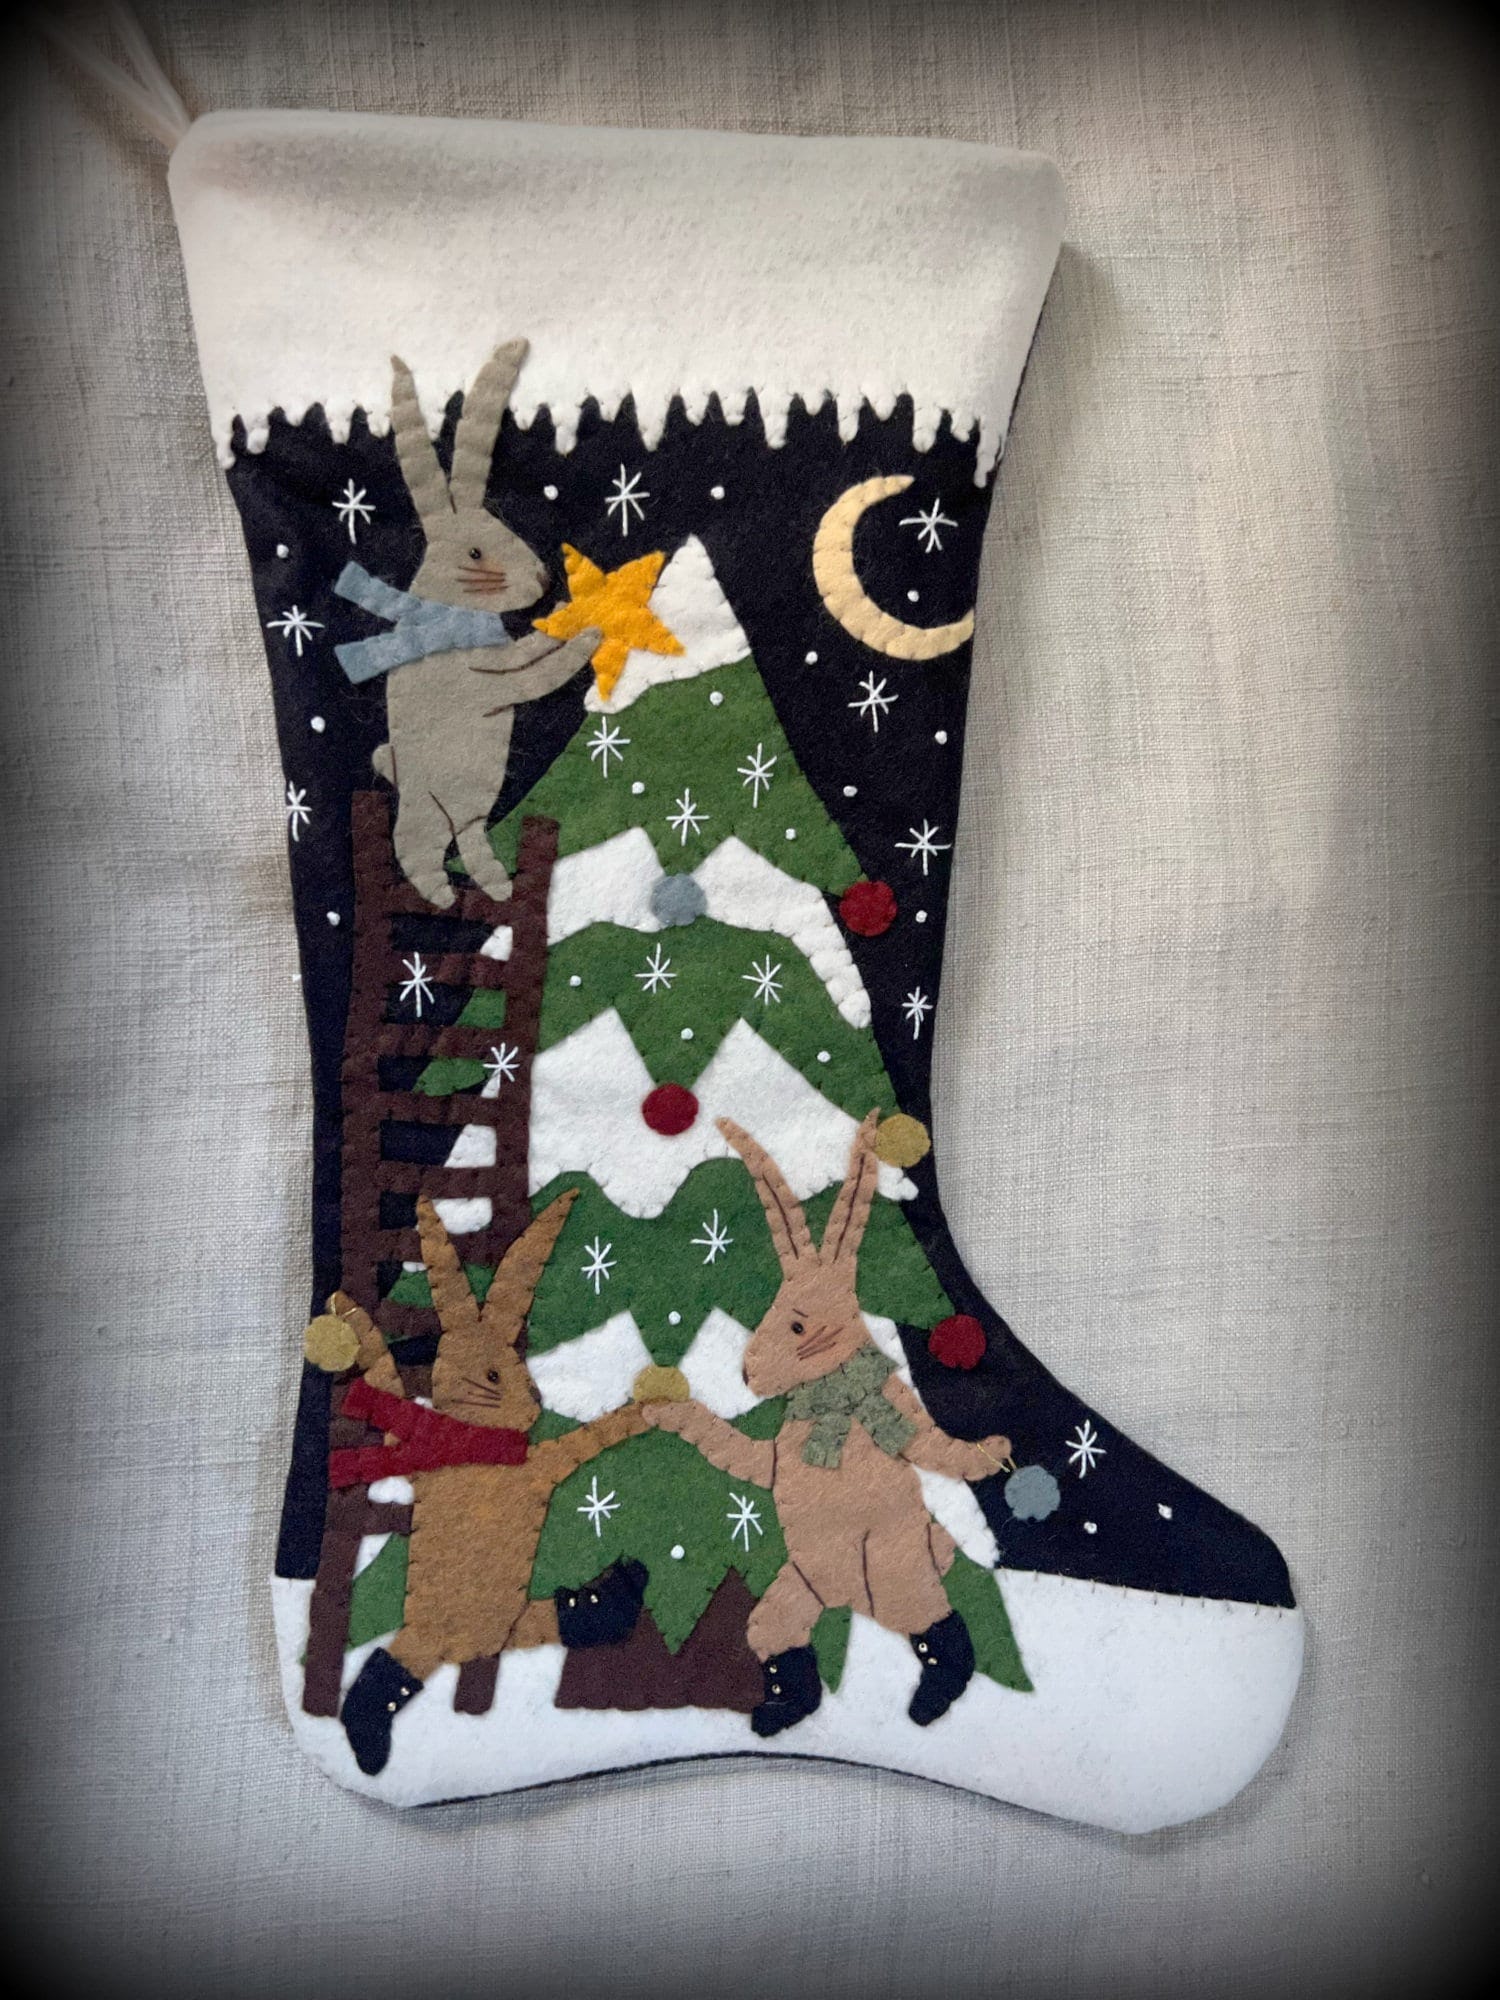 DIY KIT or PATTERN - Dance by the Light of the Moon Stocking Christmas Stocking by cheswickcompany